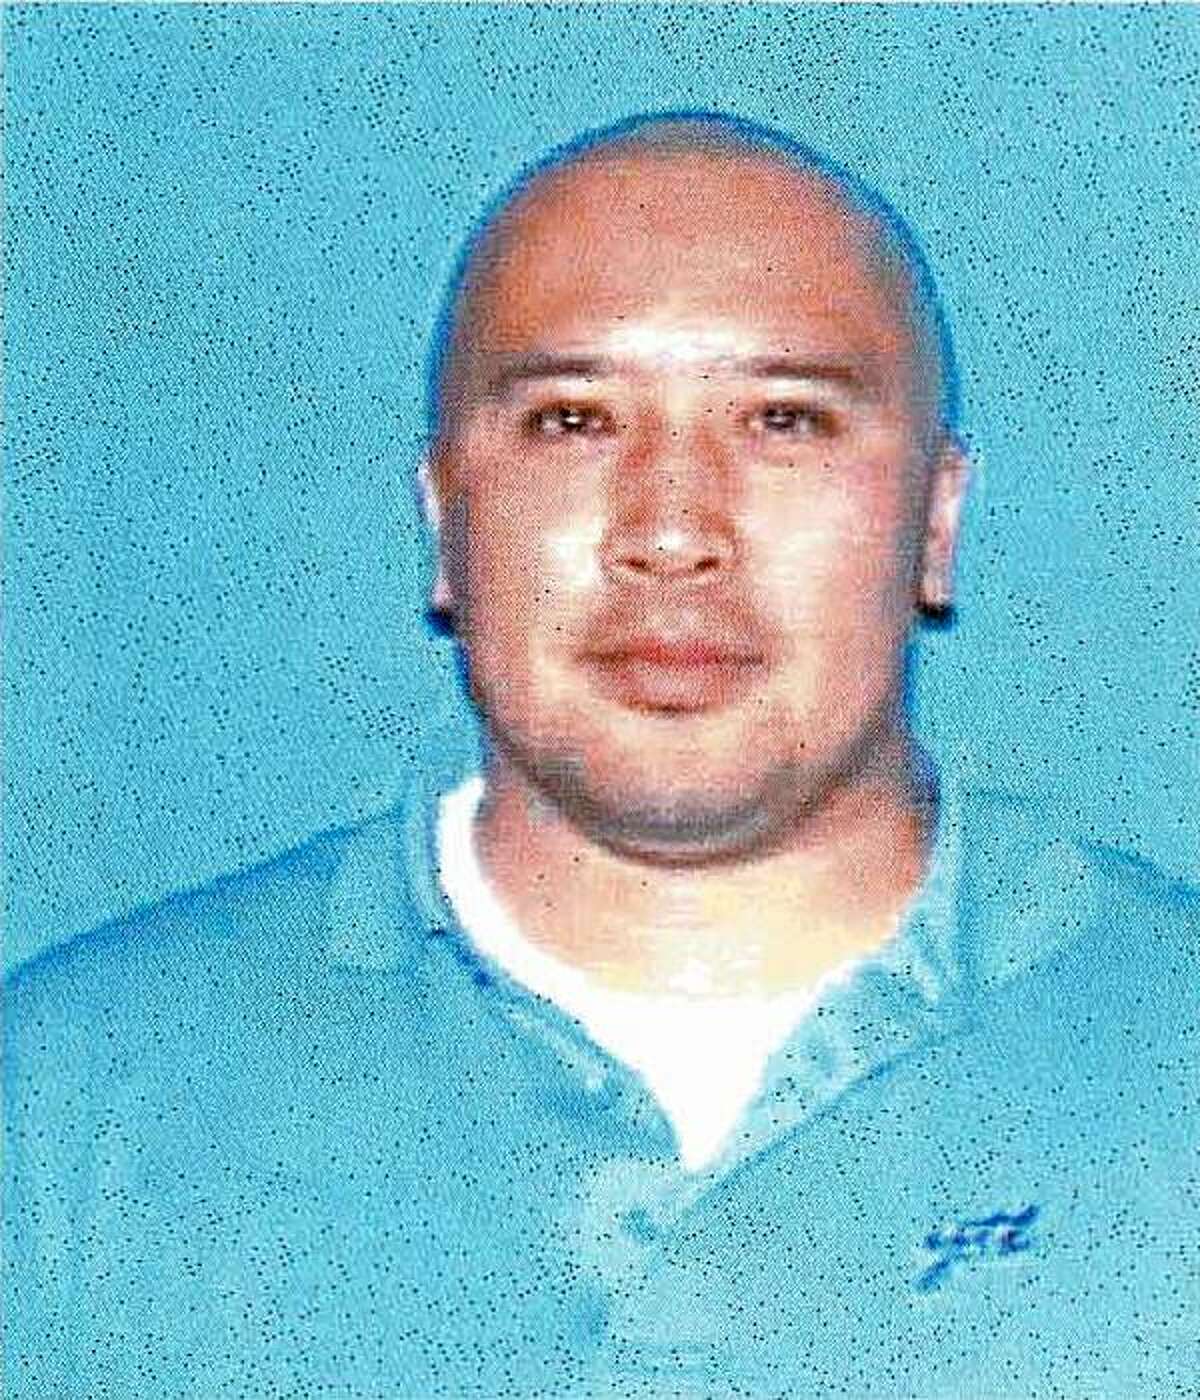 Mark Aragon, 32, of Oakland was killed when a man who allegedly refused to stop for the California Highway Patrol rammed his car in East Oakland. The suspect, Connectis Guiton, 19, of Oakland, also died in the crash at 106th Avenue and MacArthur Boulevard.